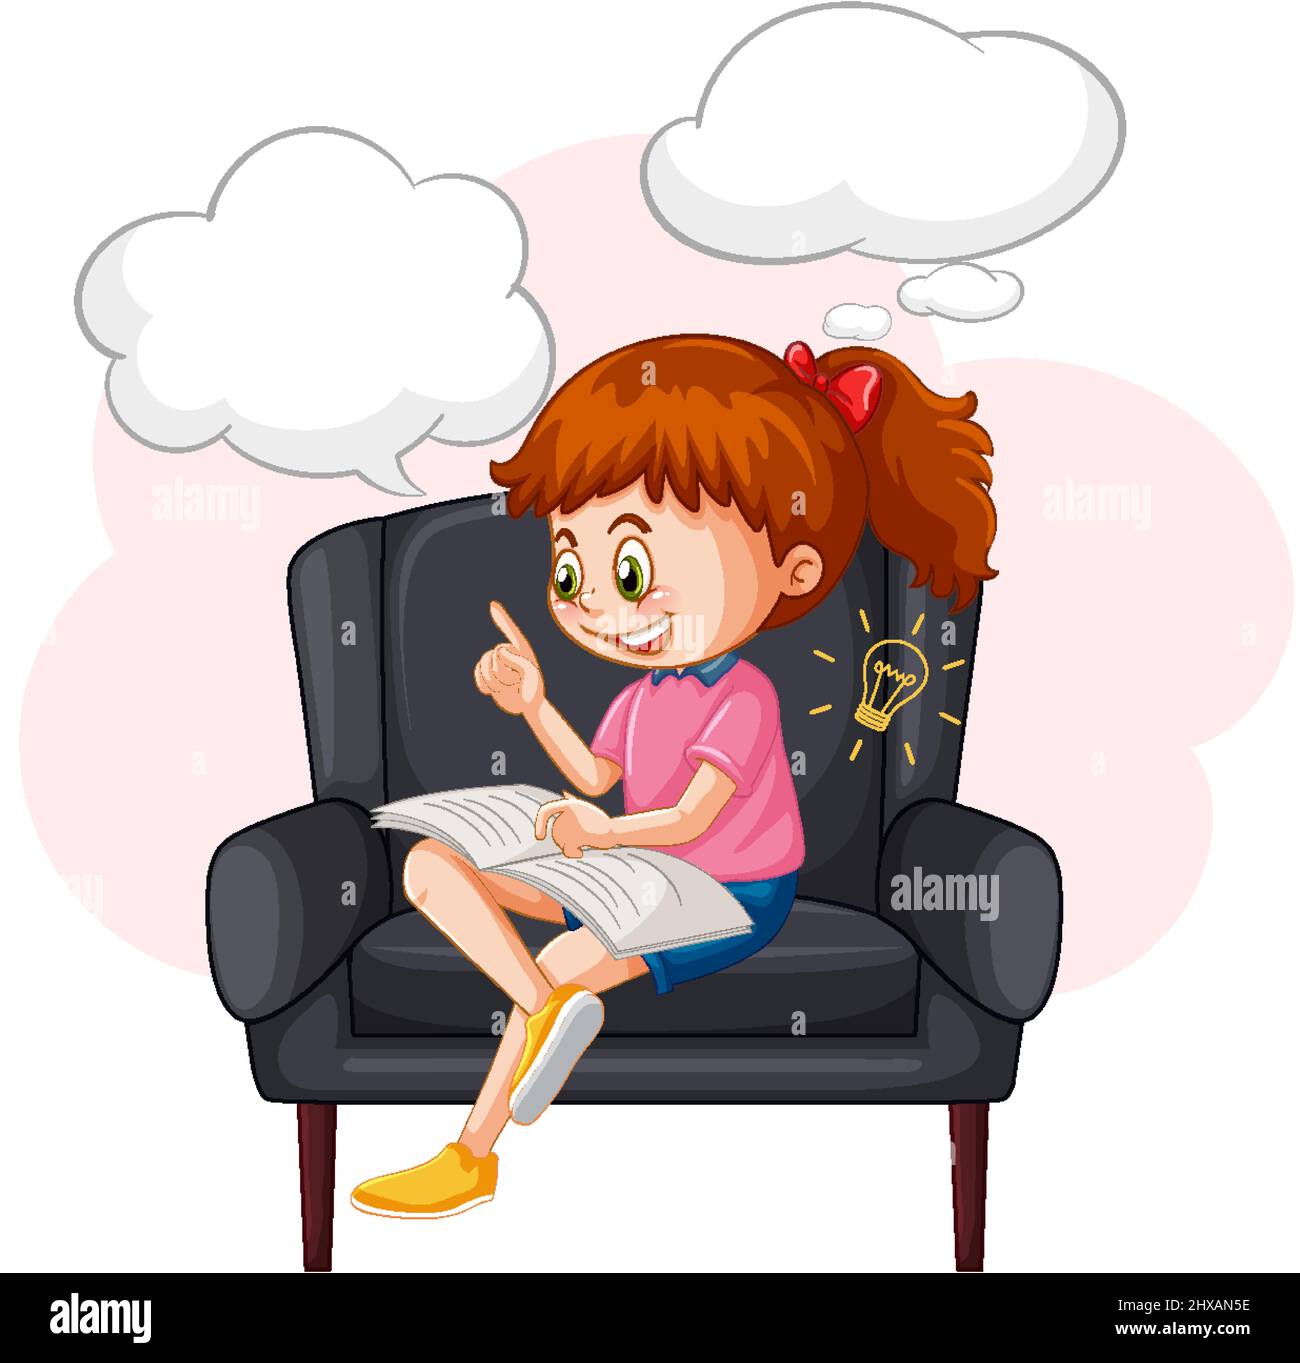 A kid reading book with speech bubble illustration Stock Vector